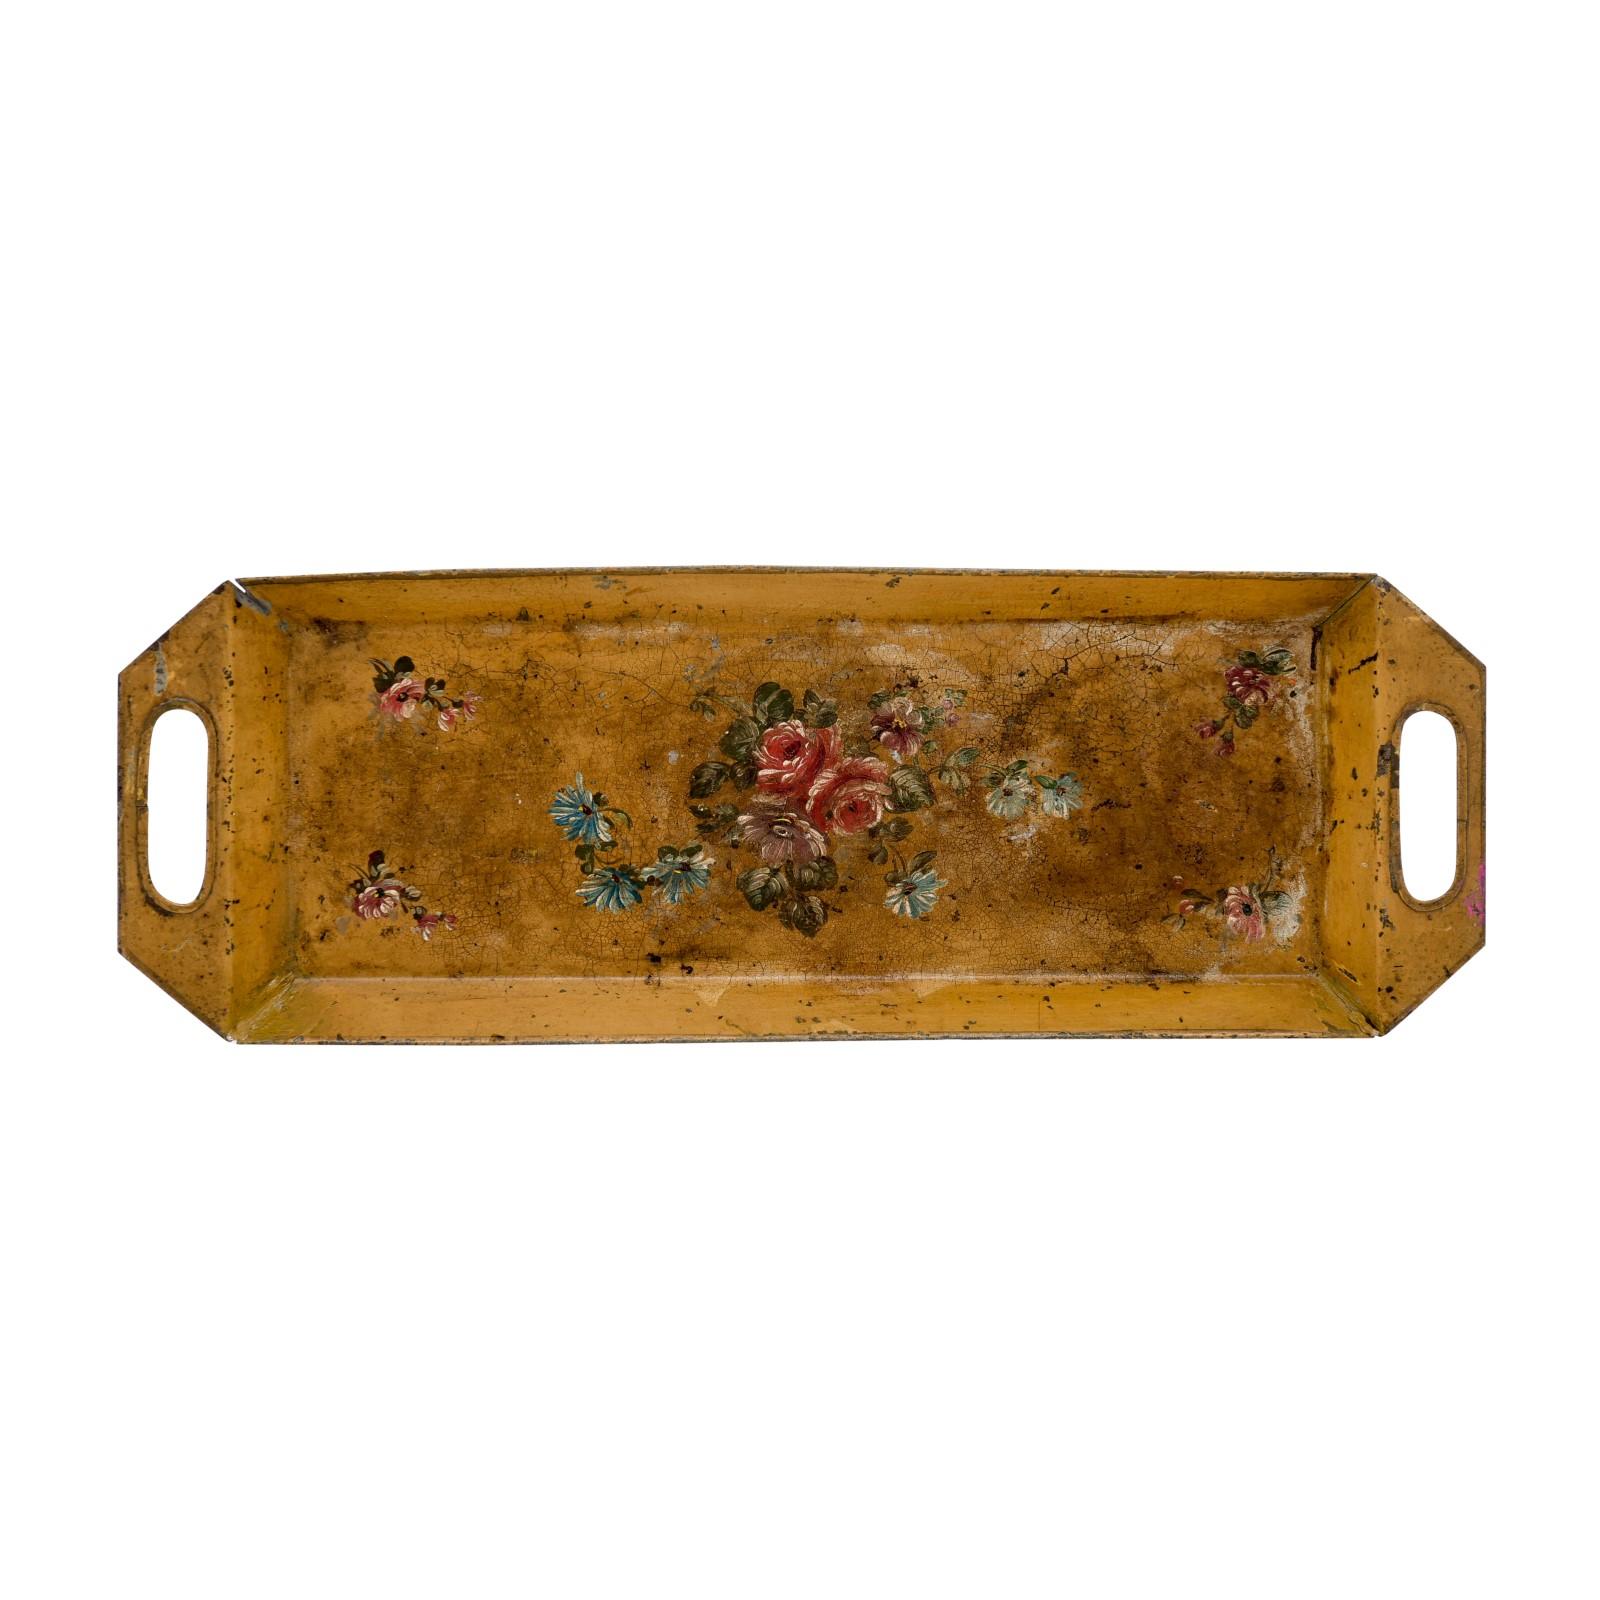 A French tole tray from the 19th century, with hand-painted floral decor, beveled edges and nicely weathered patina. Created in France during the 19th century, this rectangular tôle tray features a mustard yellow color accented by a hand-painted